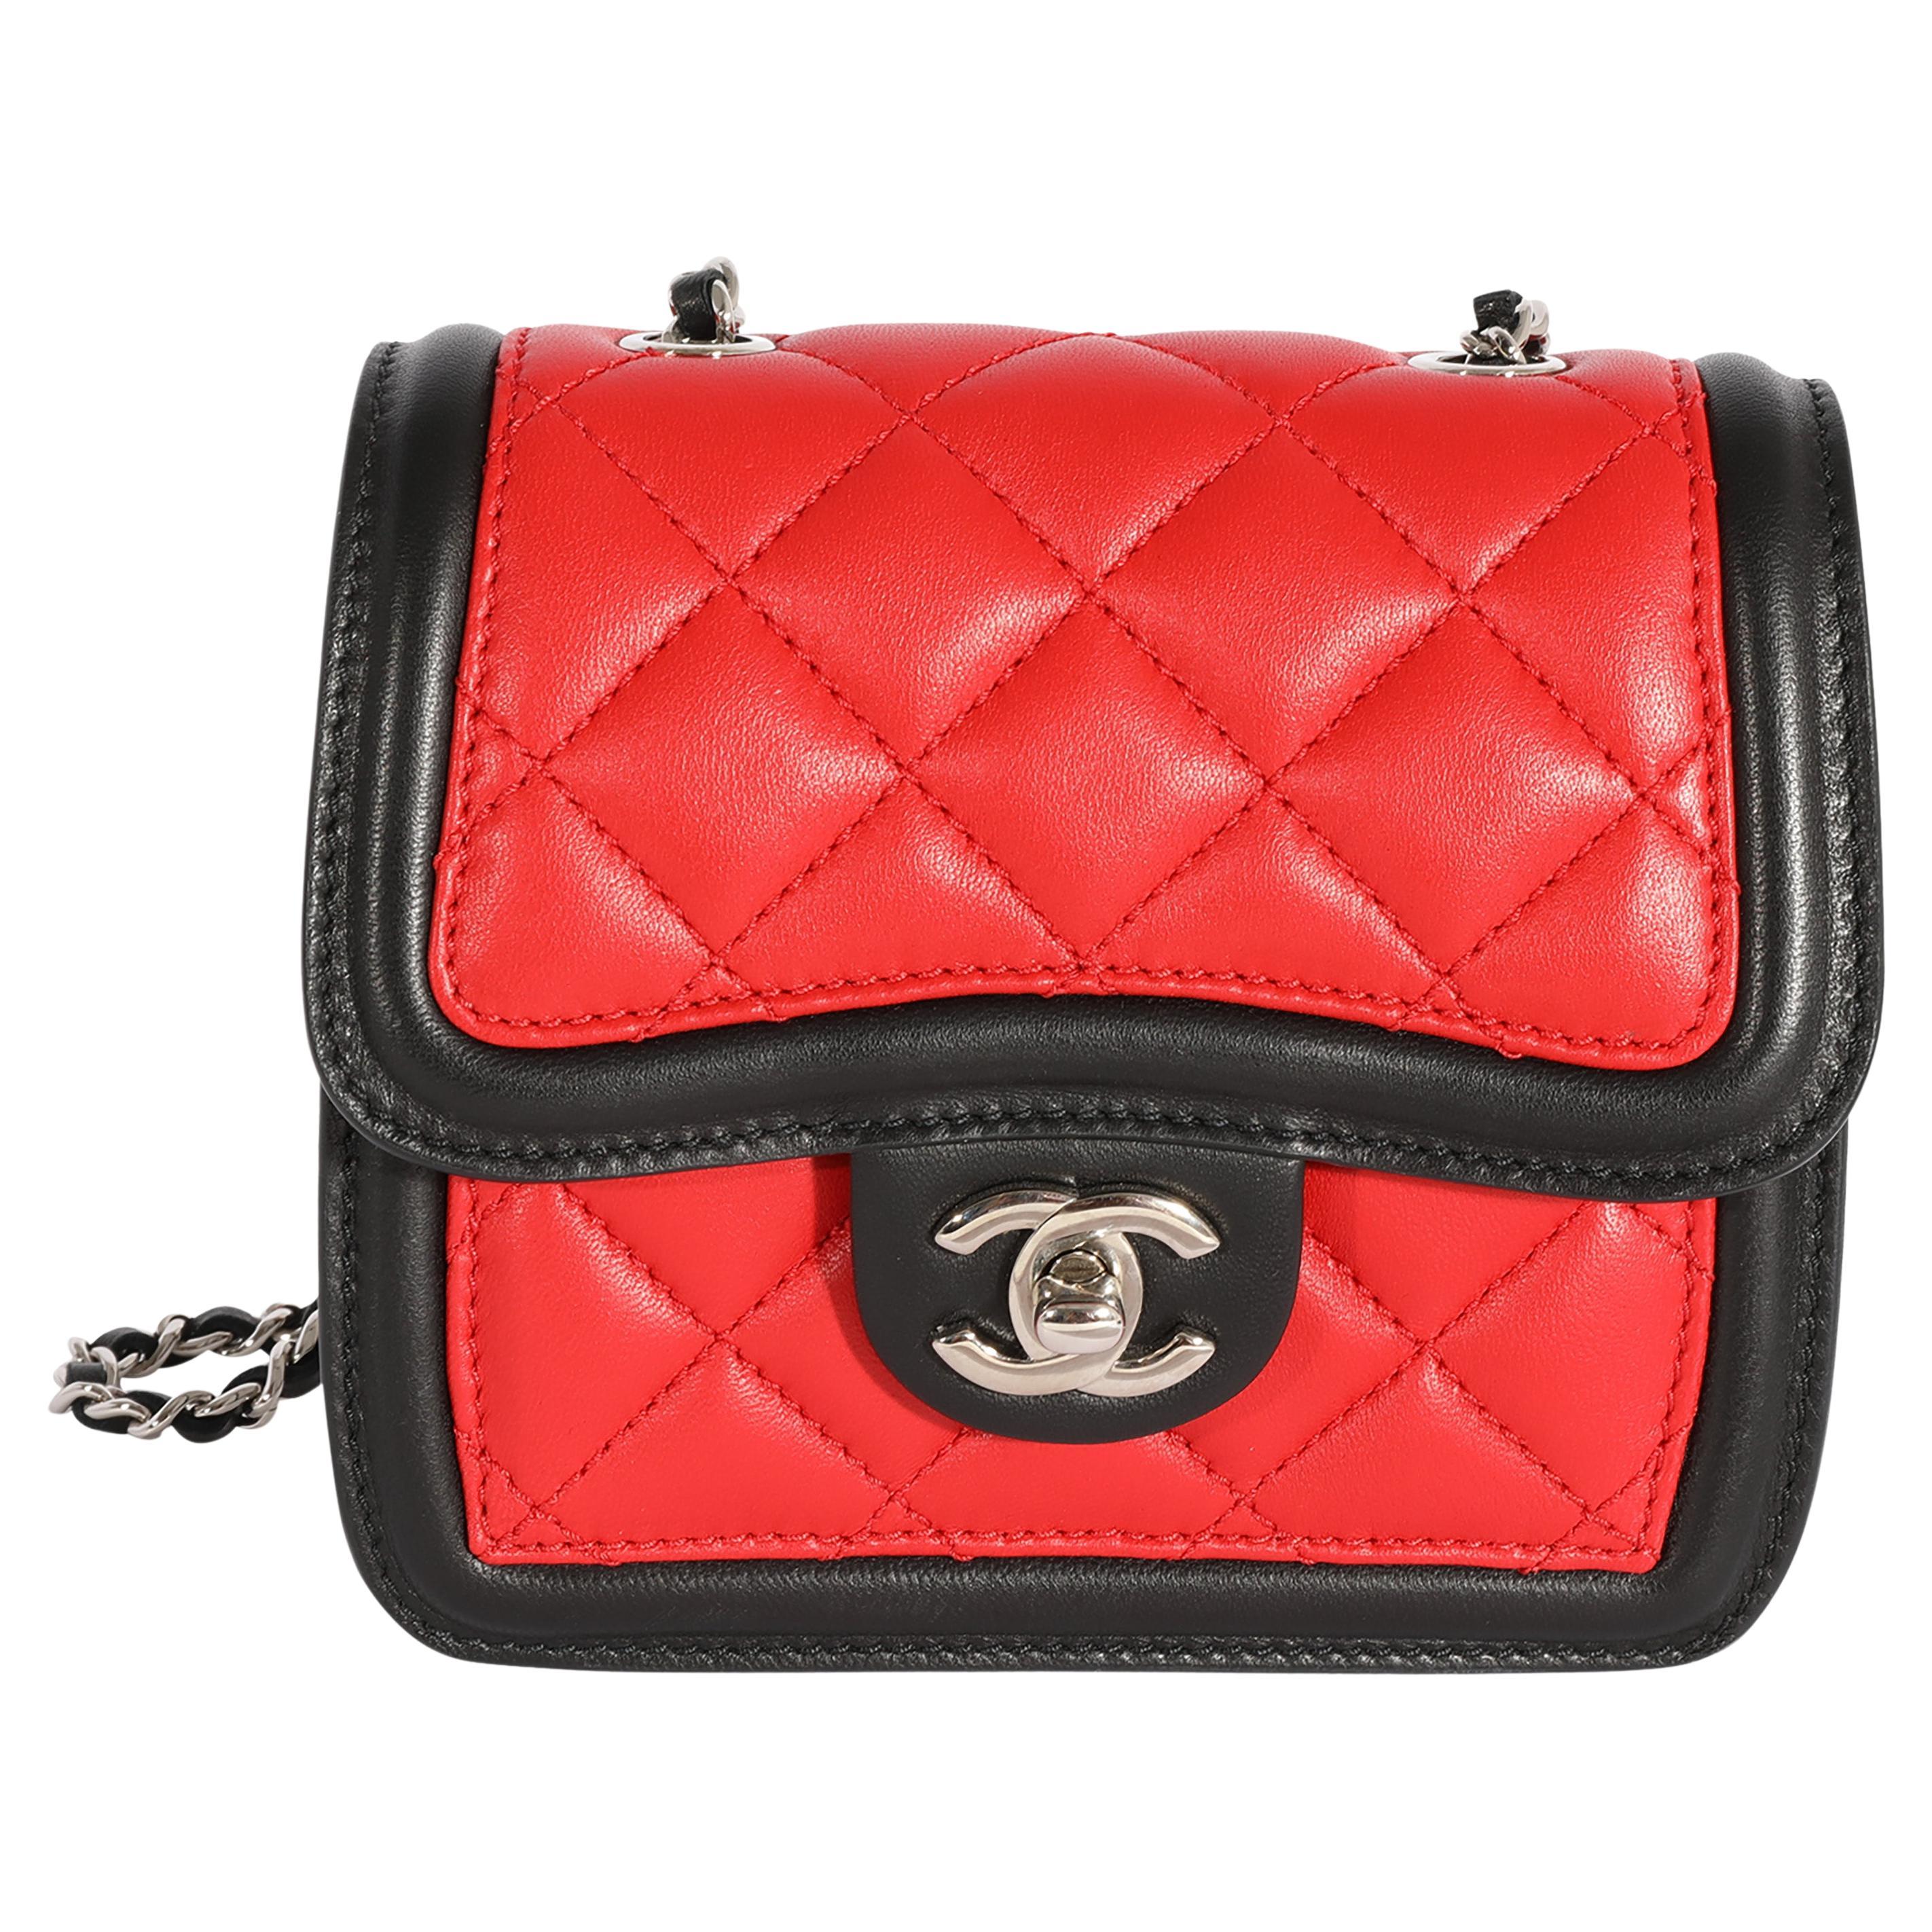 Chanel Tricolor Quilted Lambskin Mini Graphic Flap Bag